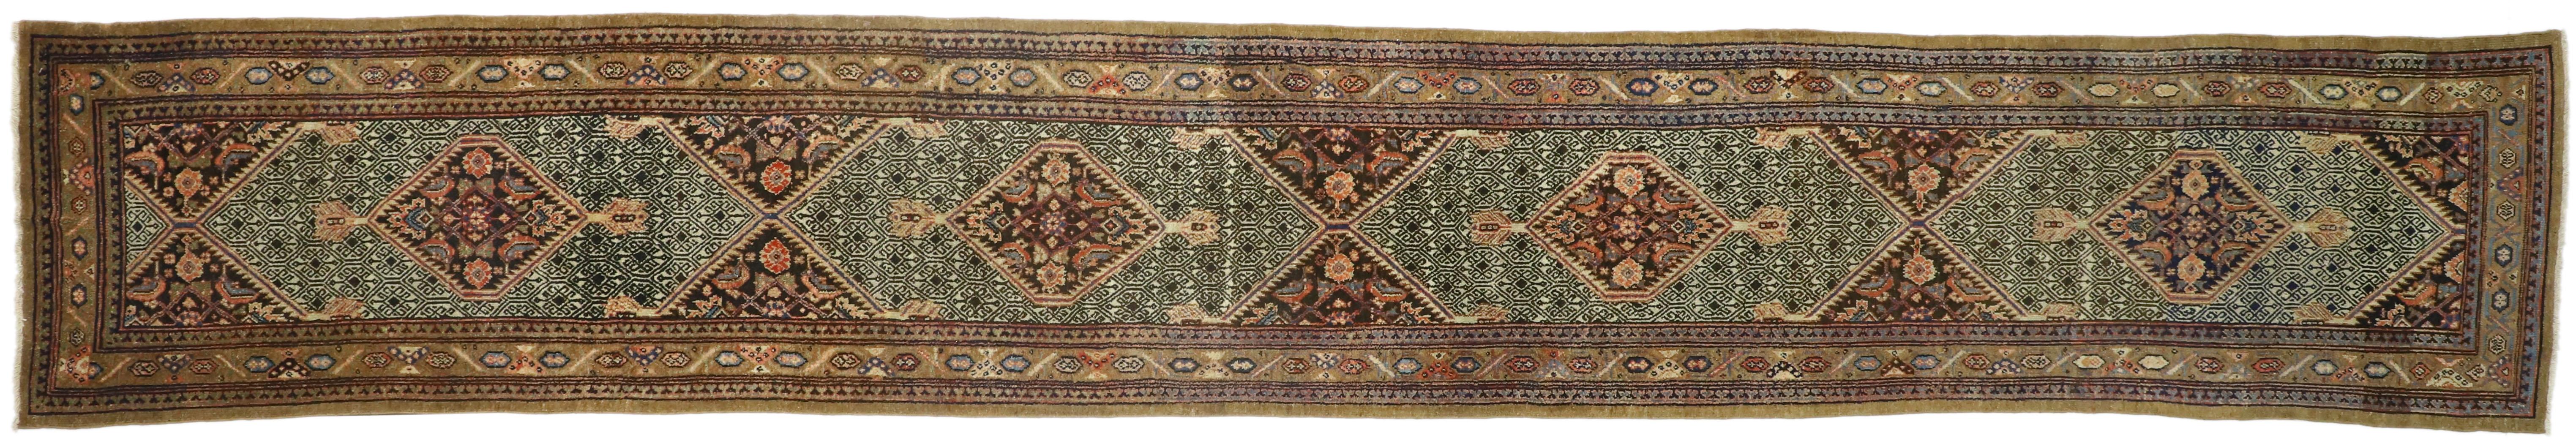 Camel Hair Antique Persian Malayer Extra-Long Runner with Arts and Crafts Style 4